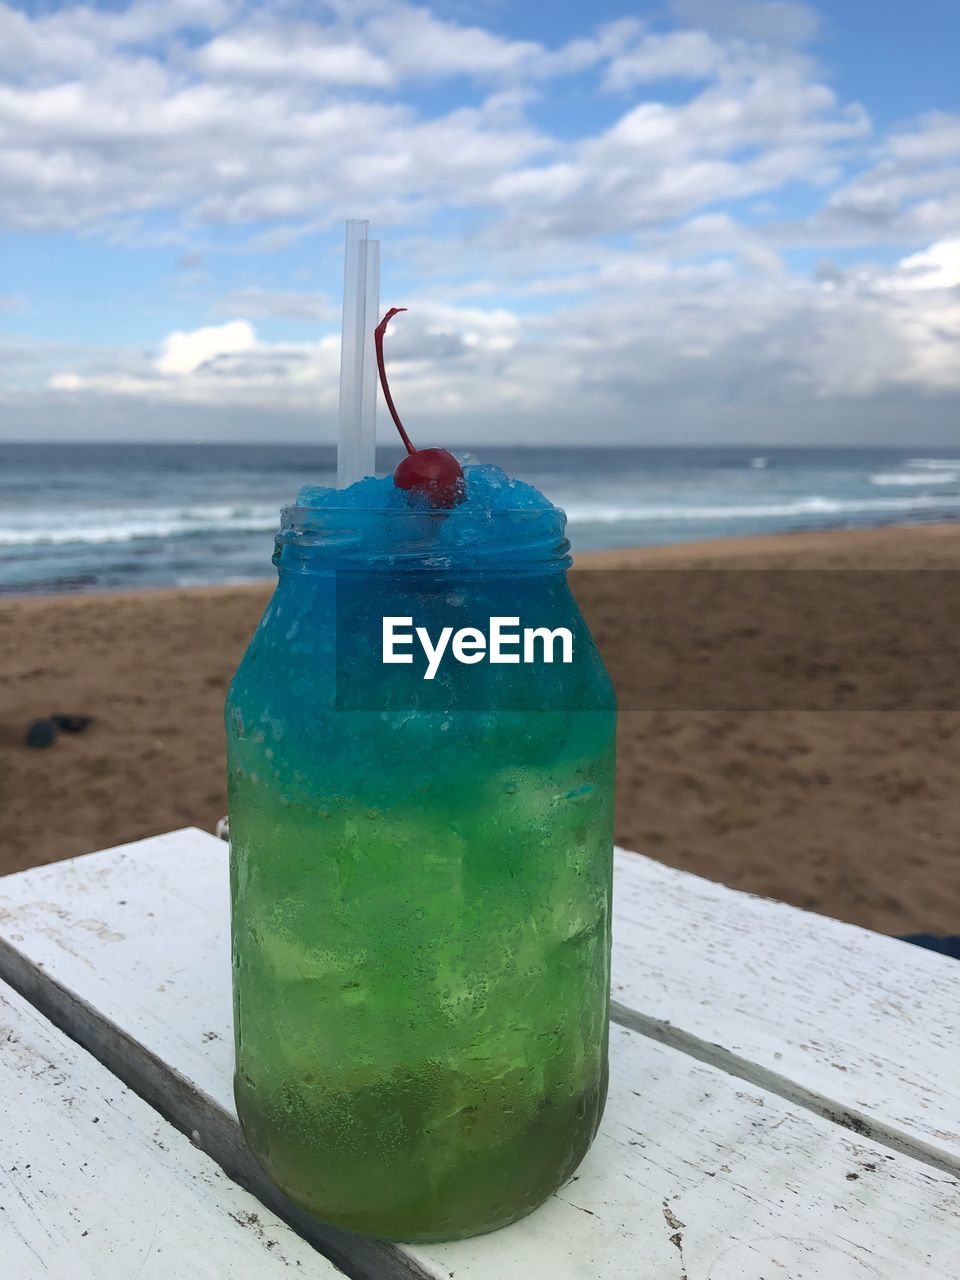 VIEW OF DRINK ON TABLE AT BEACH